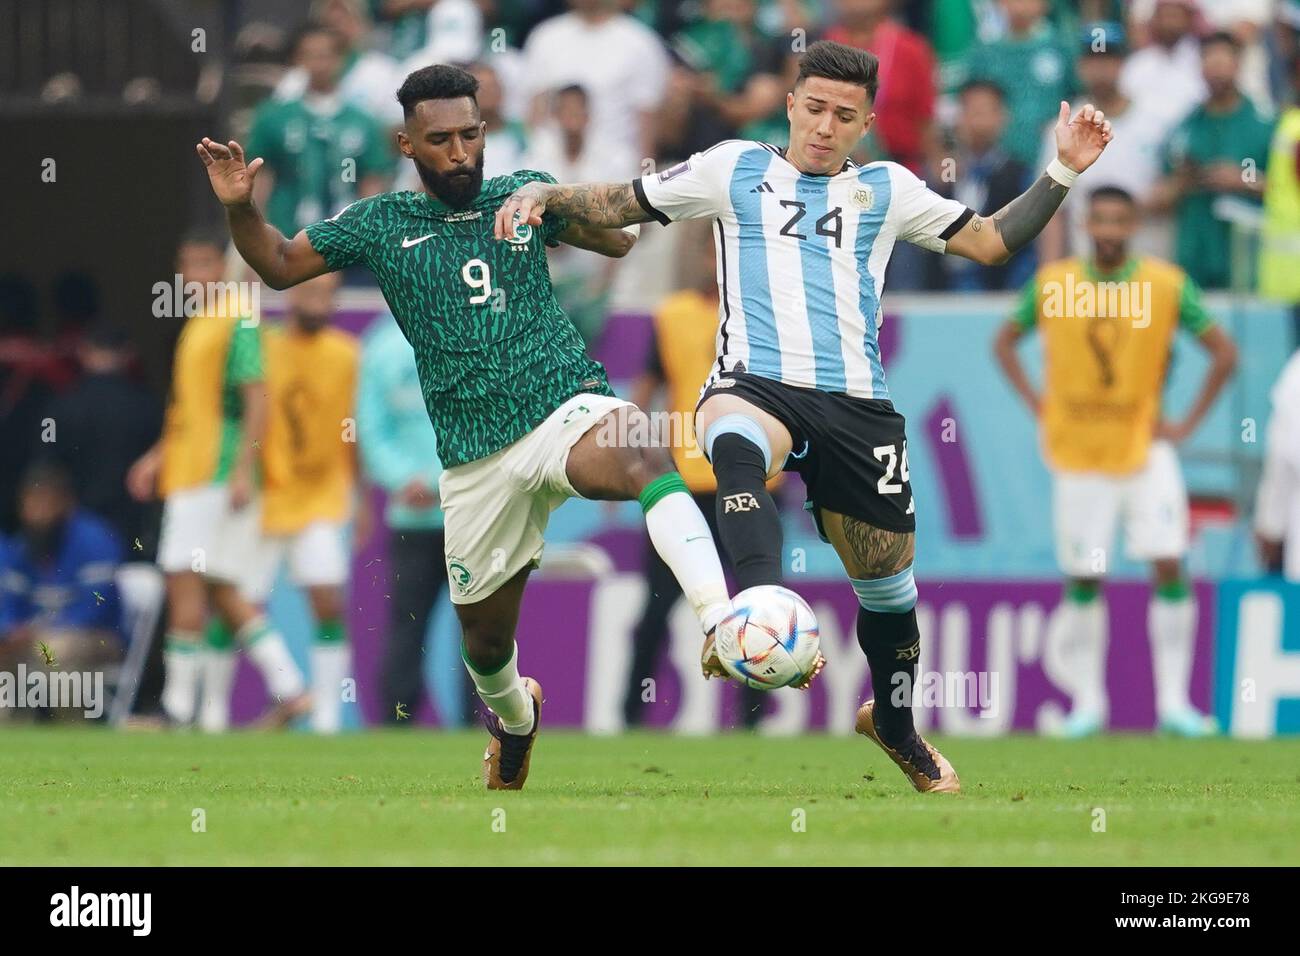 LUSAIL, QATAR - NOVEMBER 22: Player of Argentina Enzo Fernández fights for the ball with player of Saudi Arabia Feras Albrikan during the 2022 FIFA World Cup Qatar group C between Argentina and Saudi Arabia at Lusail Stadium on November 22, 2022 in Lusail, Qatar. (Photo by Florencia Tan Jun/PxImages) Stock Photo